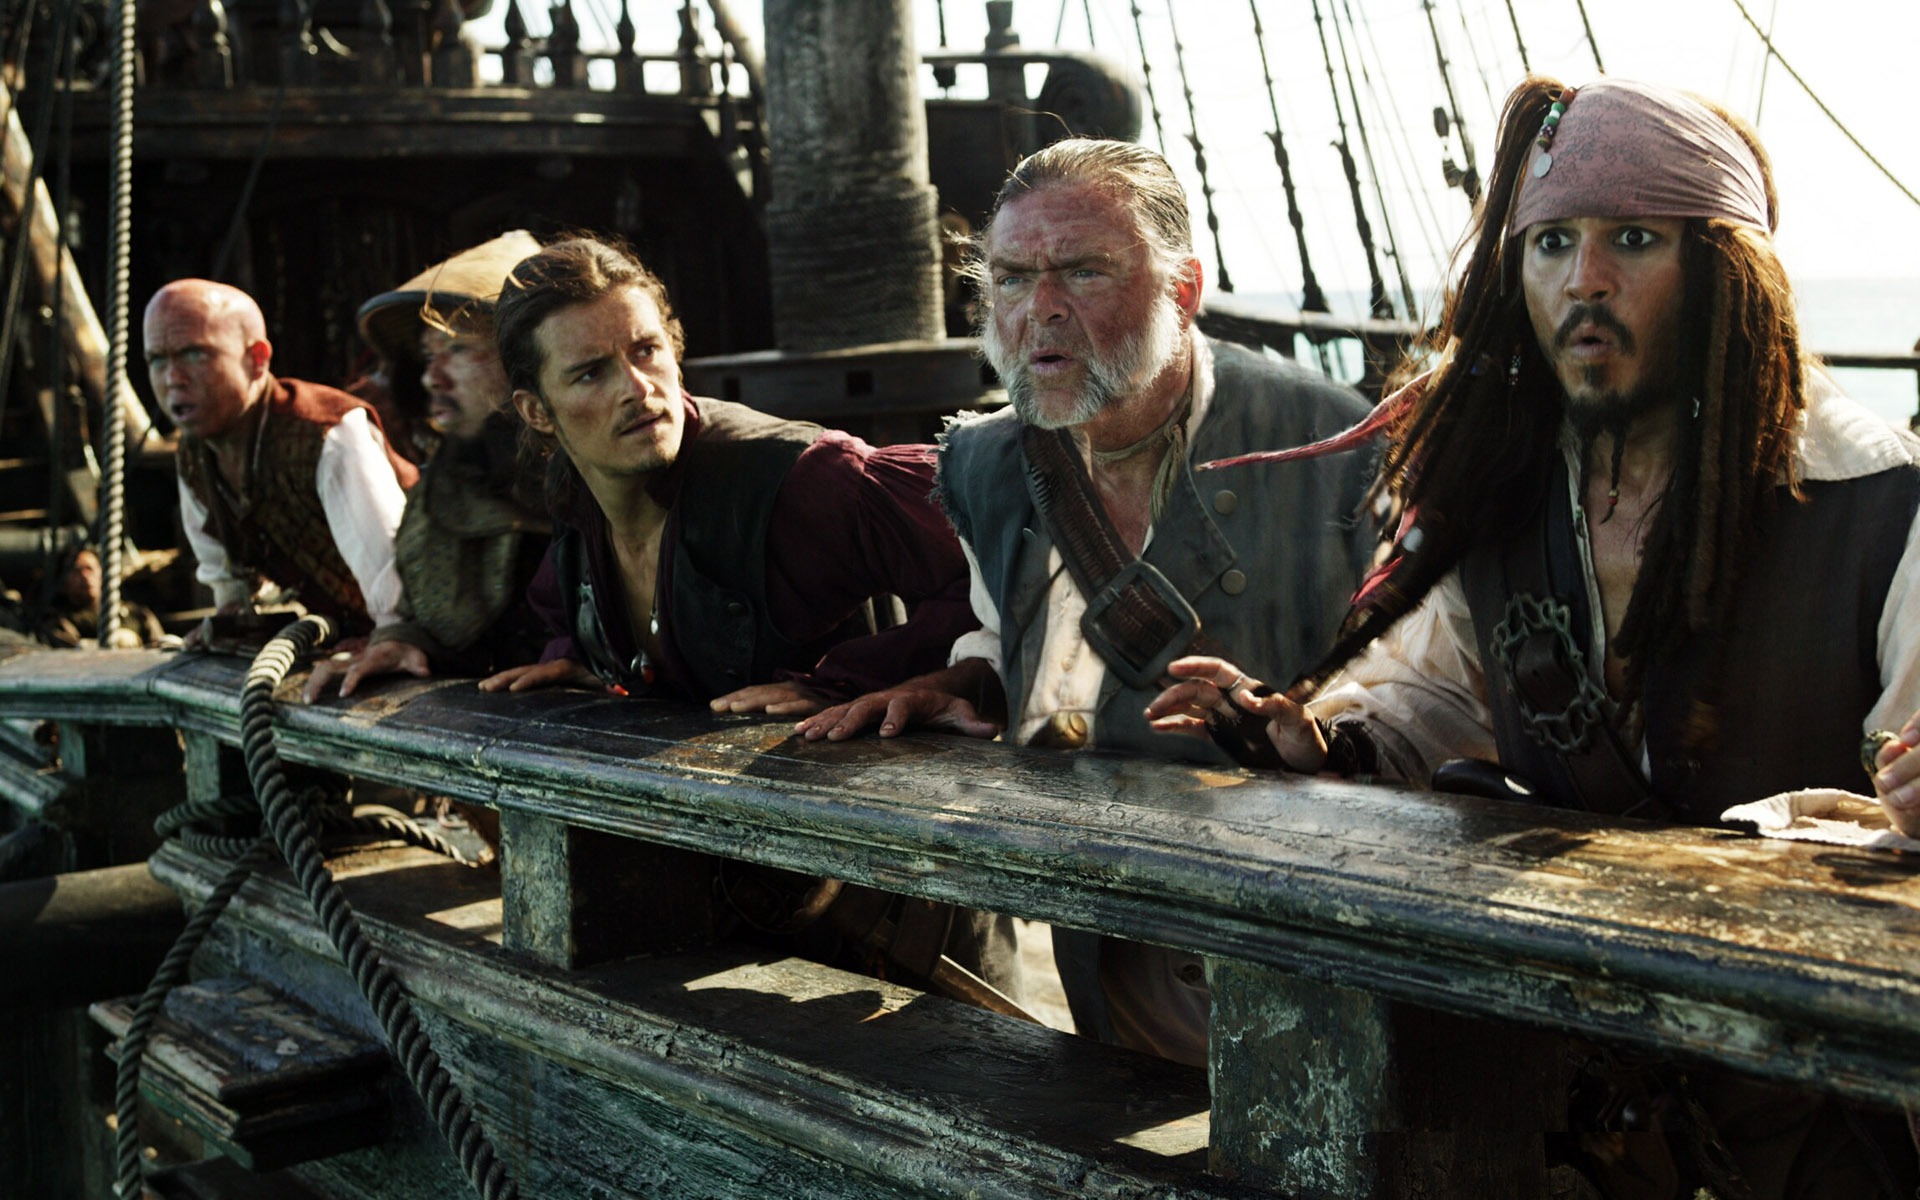 Pirates of the Caribbean 3 HD Wallpapers #8 - 1920x1200